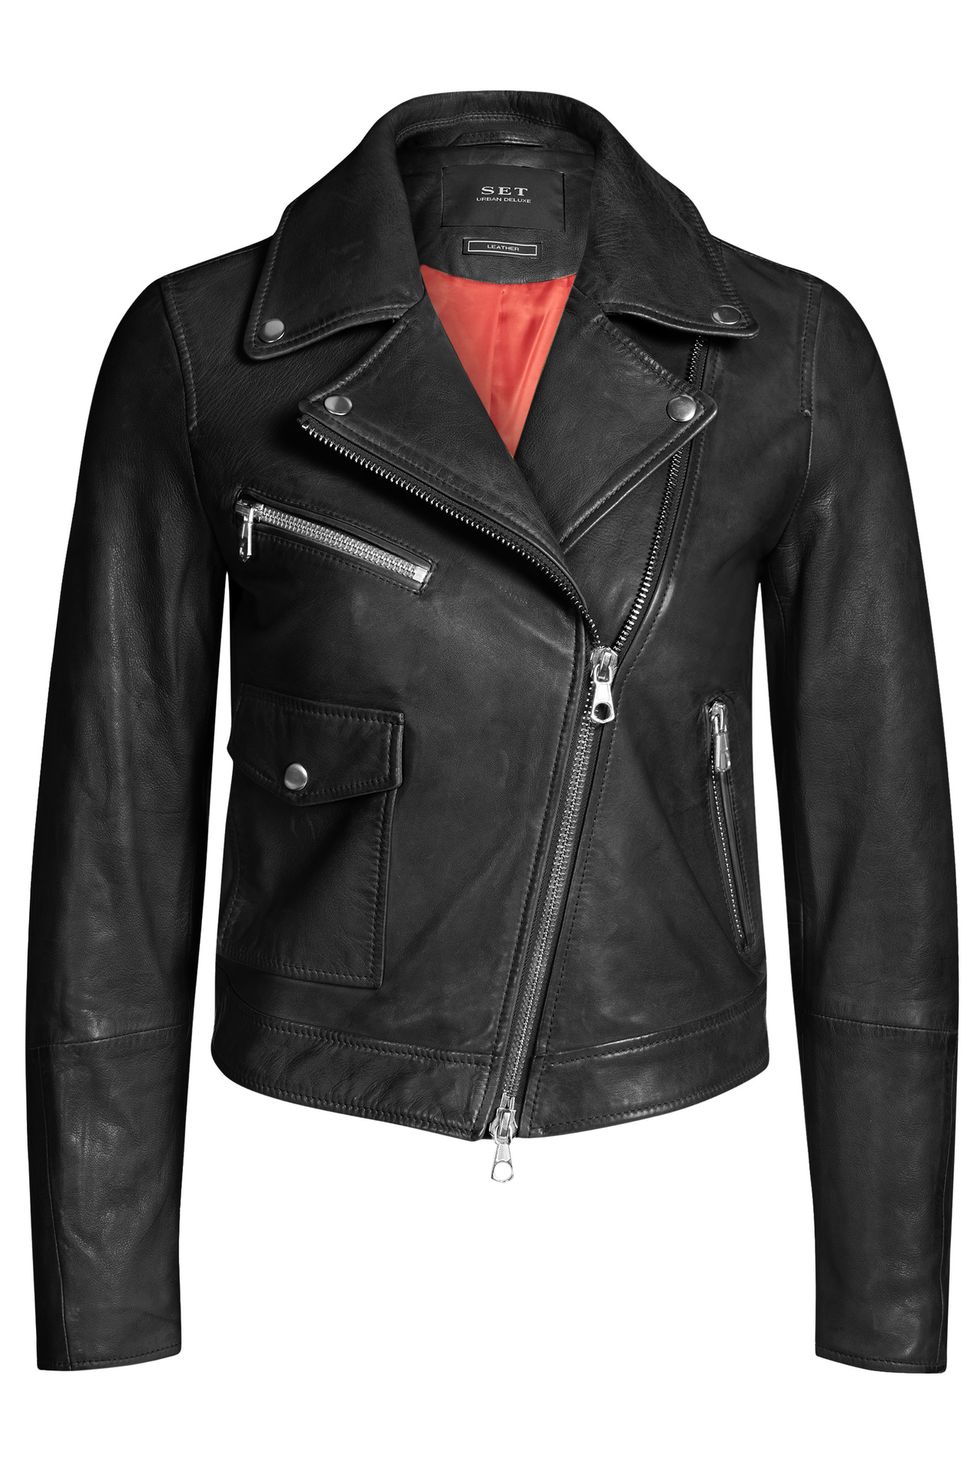 Clothing, Jacket, Leather, Black, Leather jacket, Outerwear, Sleeve, Textile, Top, Zipper, 